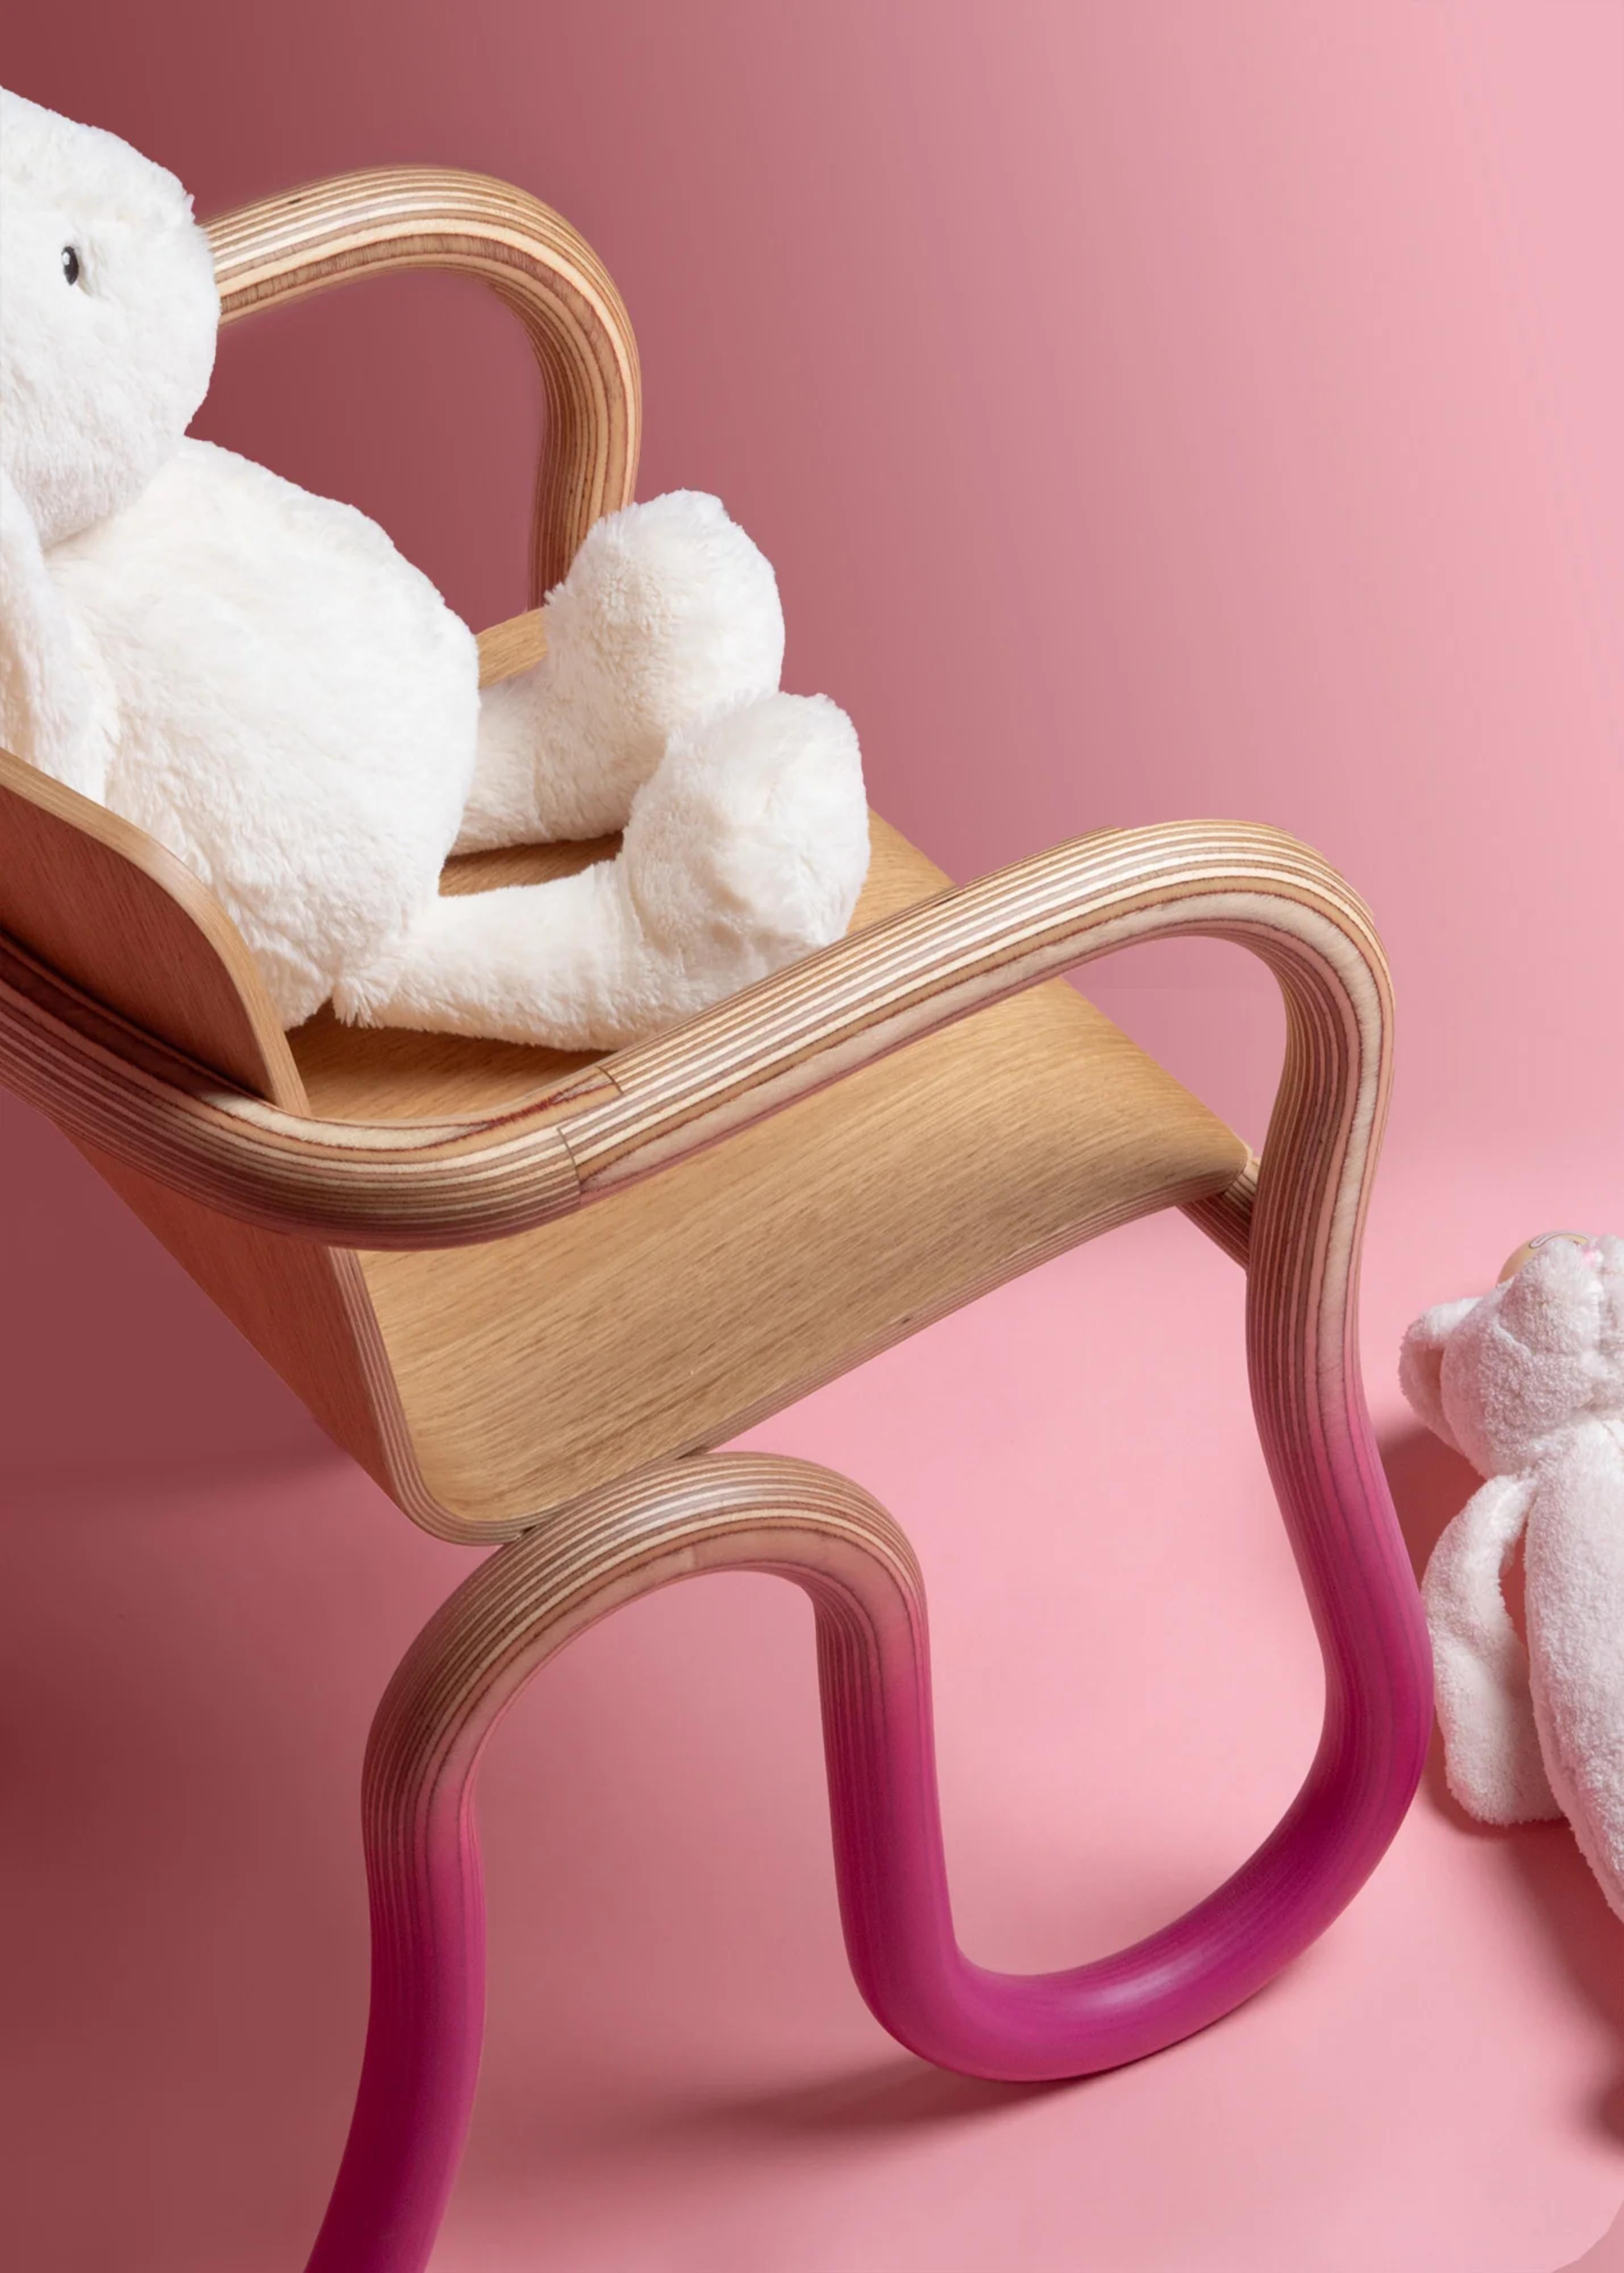 Kolho Junior Chair by Made by Choice
With Matthew Day Jackson
Dimensions: W 43 x D 42 x H 59 cm
Materials: Plywood
Available: Blue Gradient, Pink Gradient

Expertly designed for little ones, the Kolho Junior chair from the Kolho collection boasts